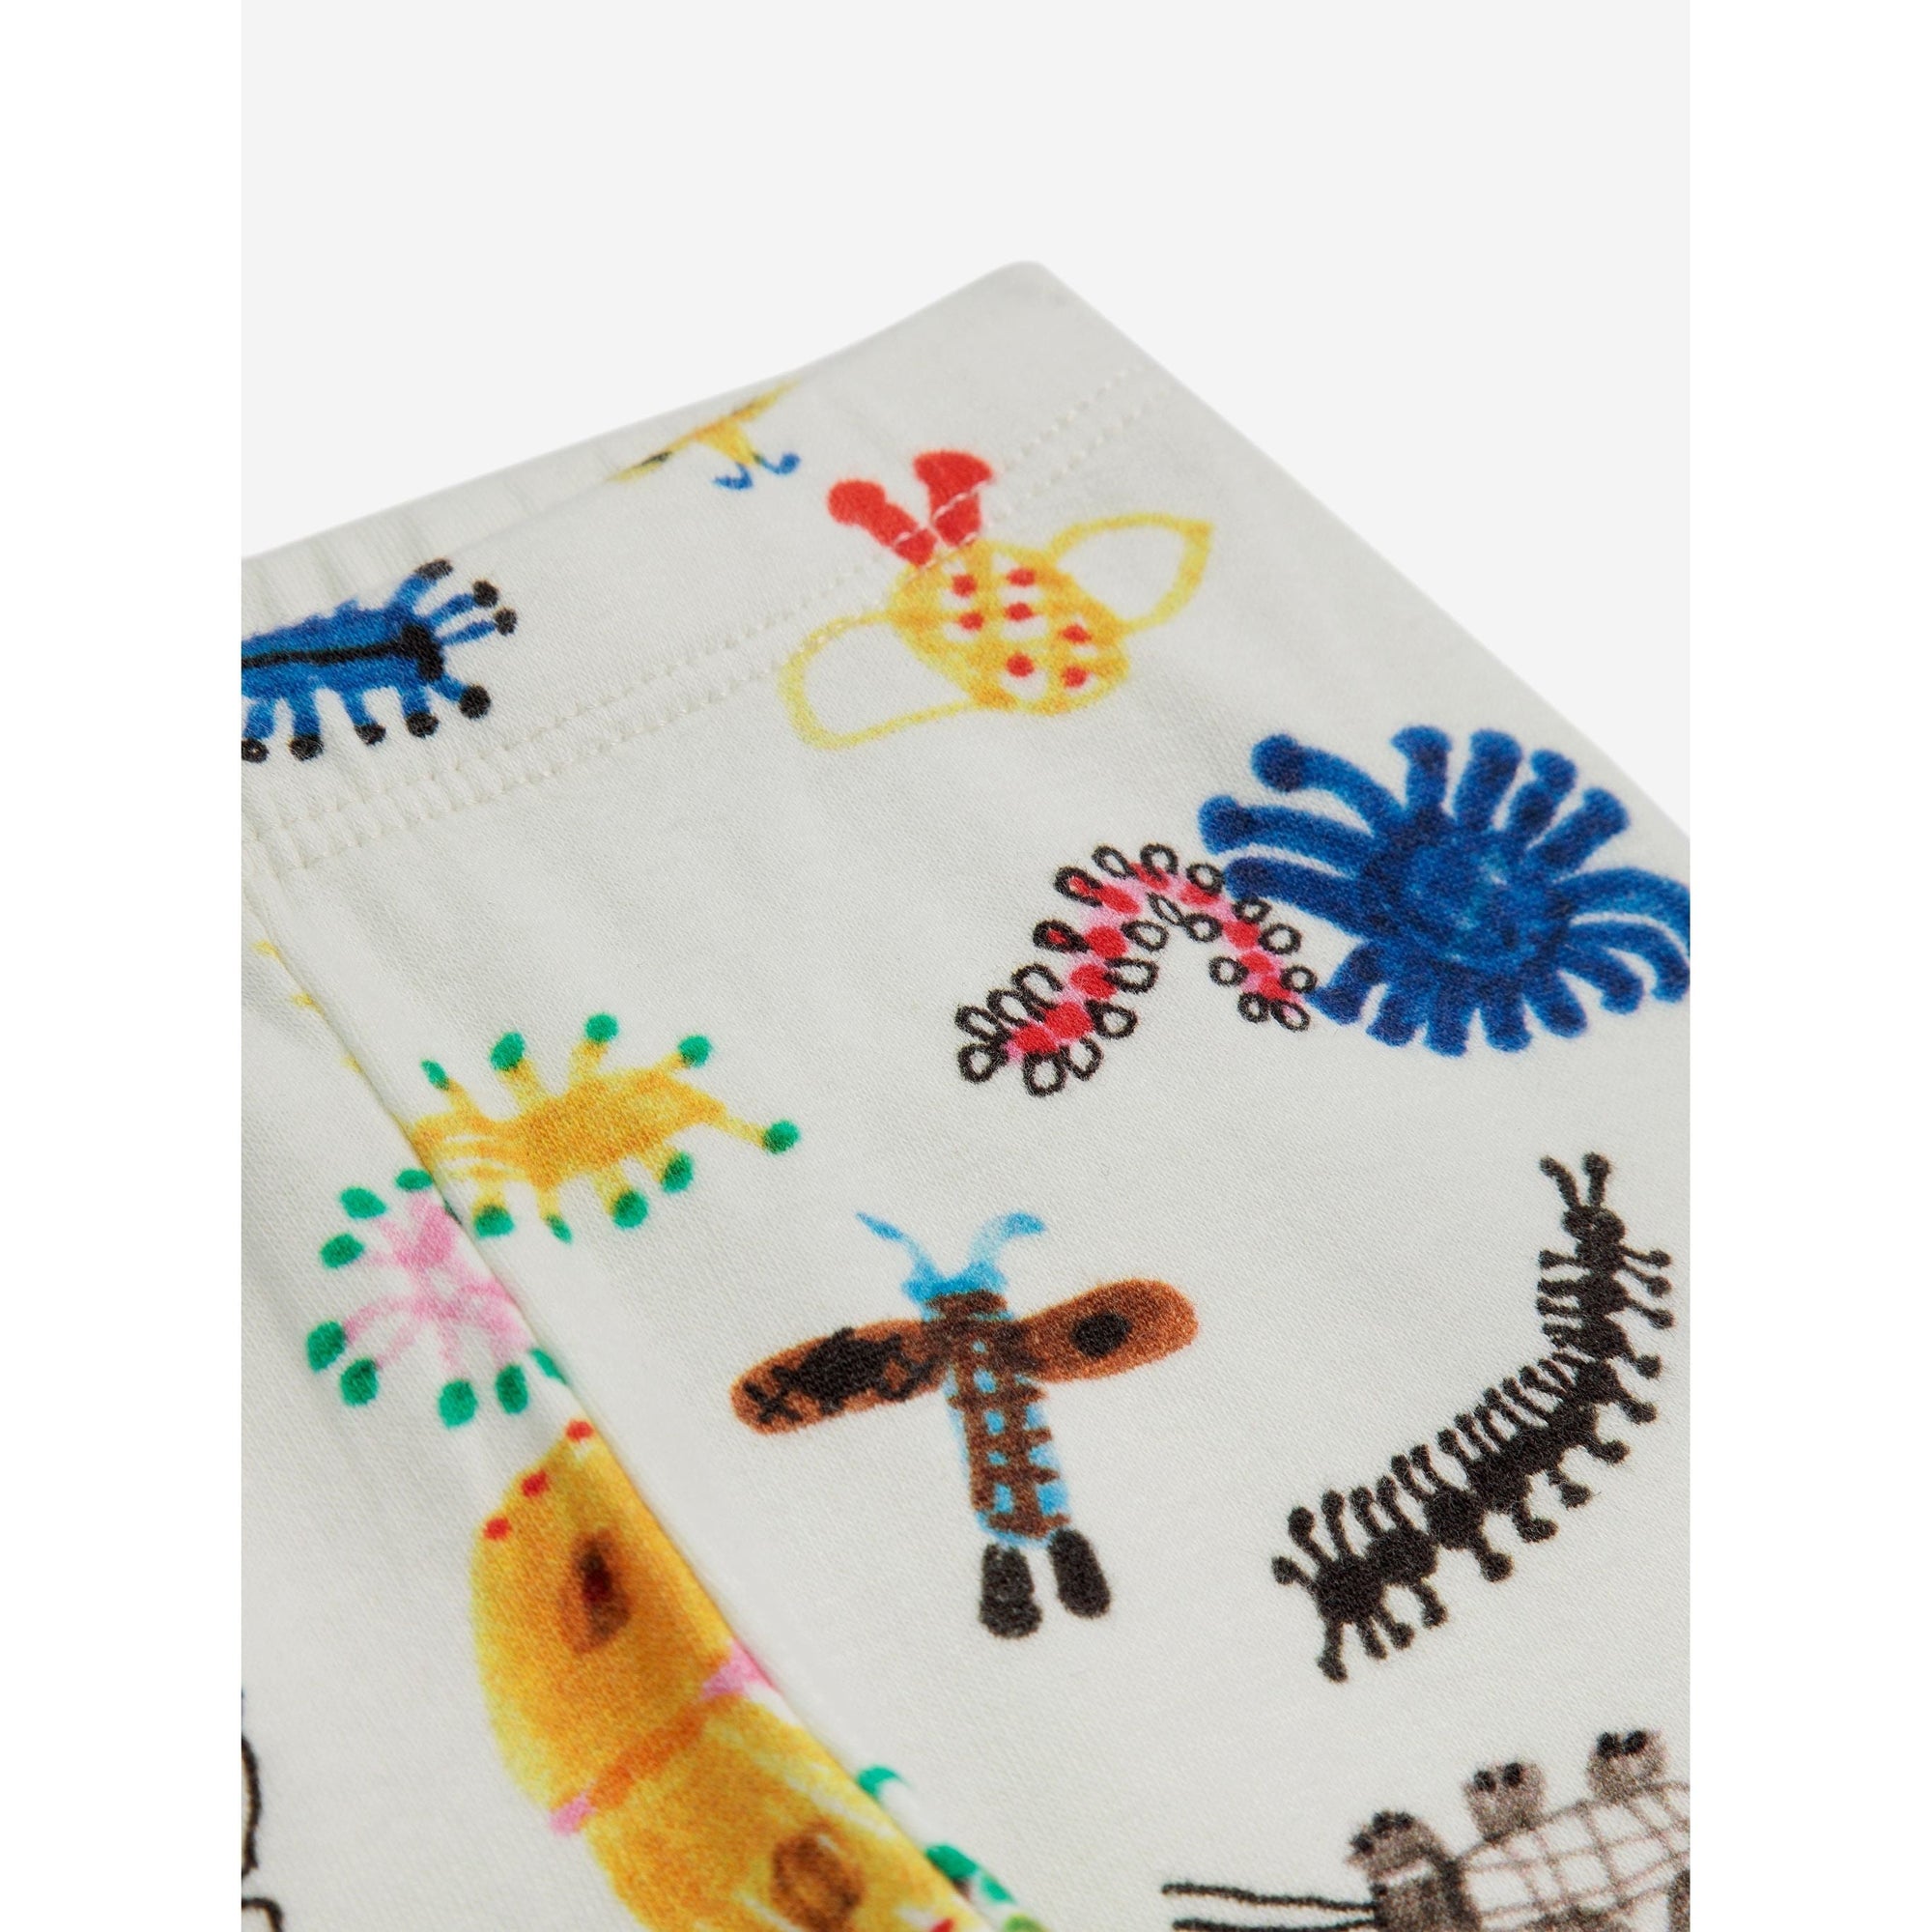 Baby Funny Insects All Over Leggings